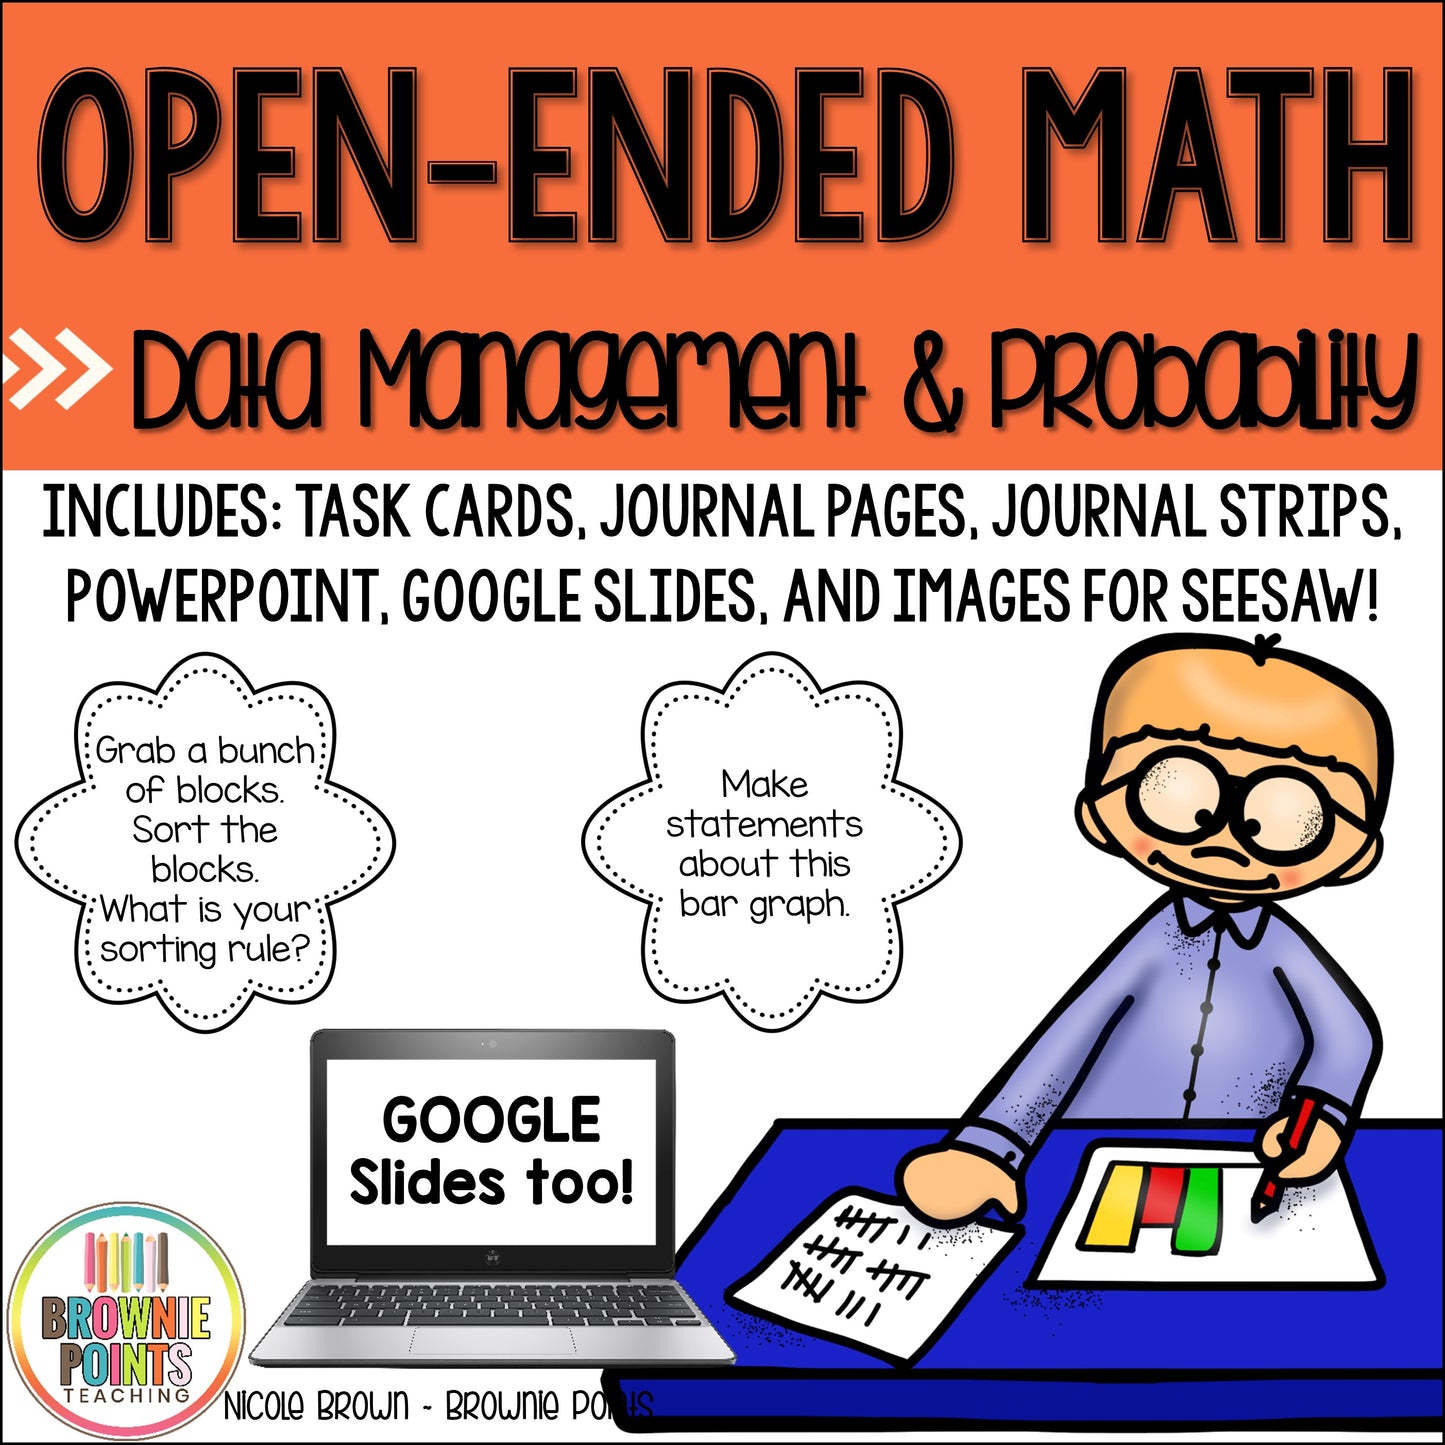 Open-Ended Math Questions - Data Management & Probability